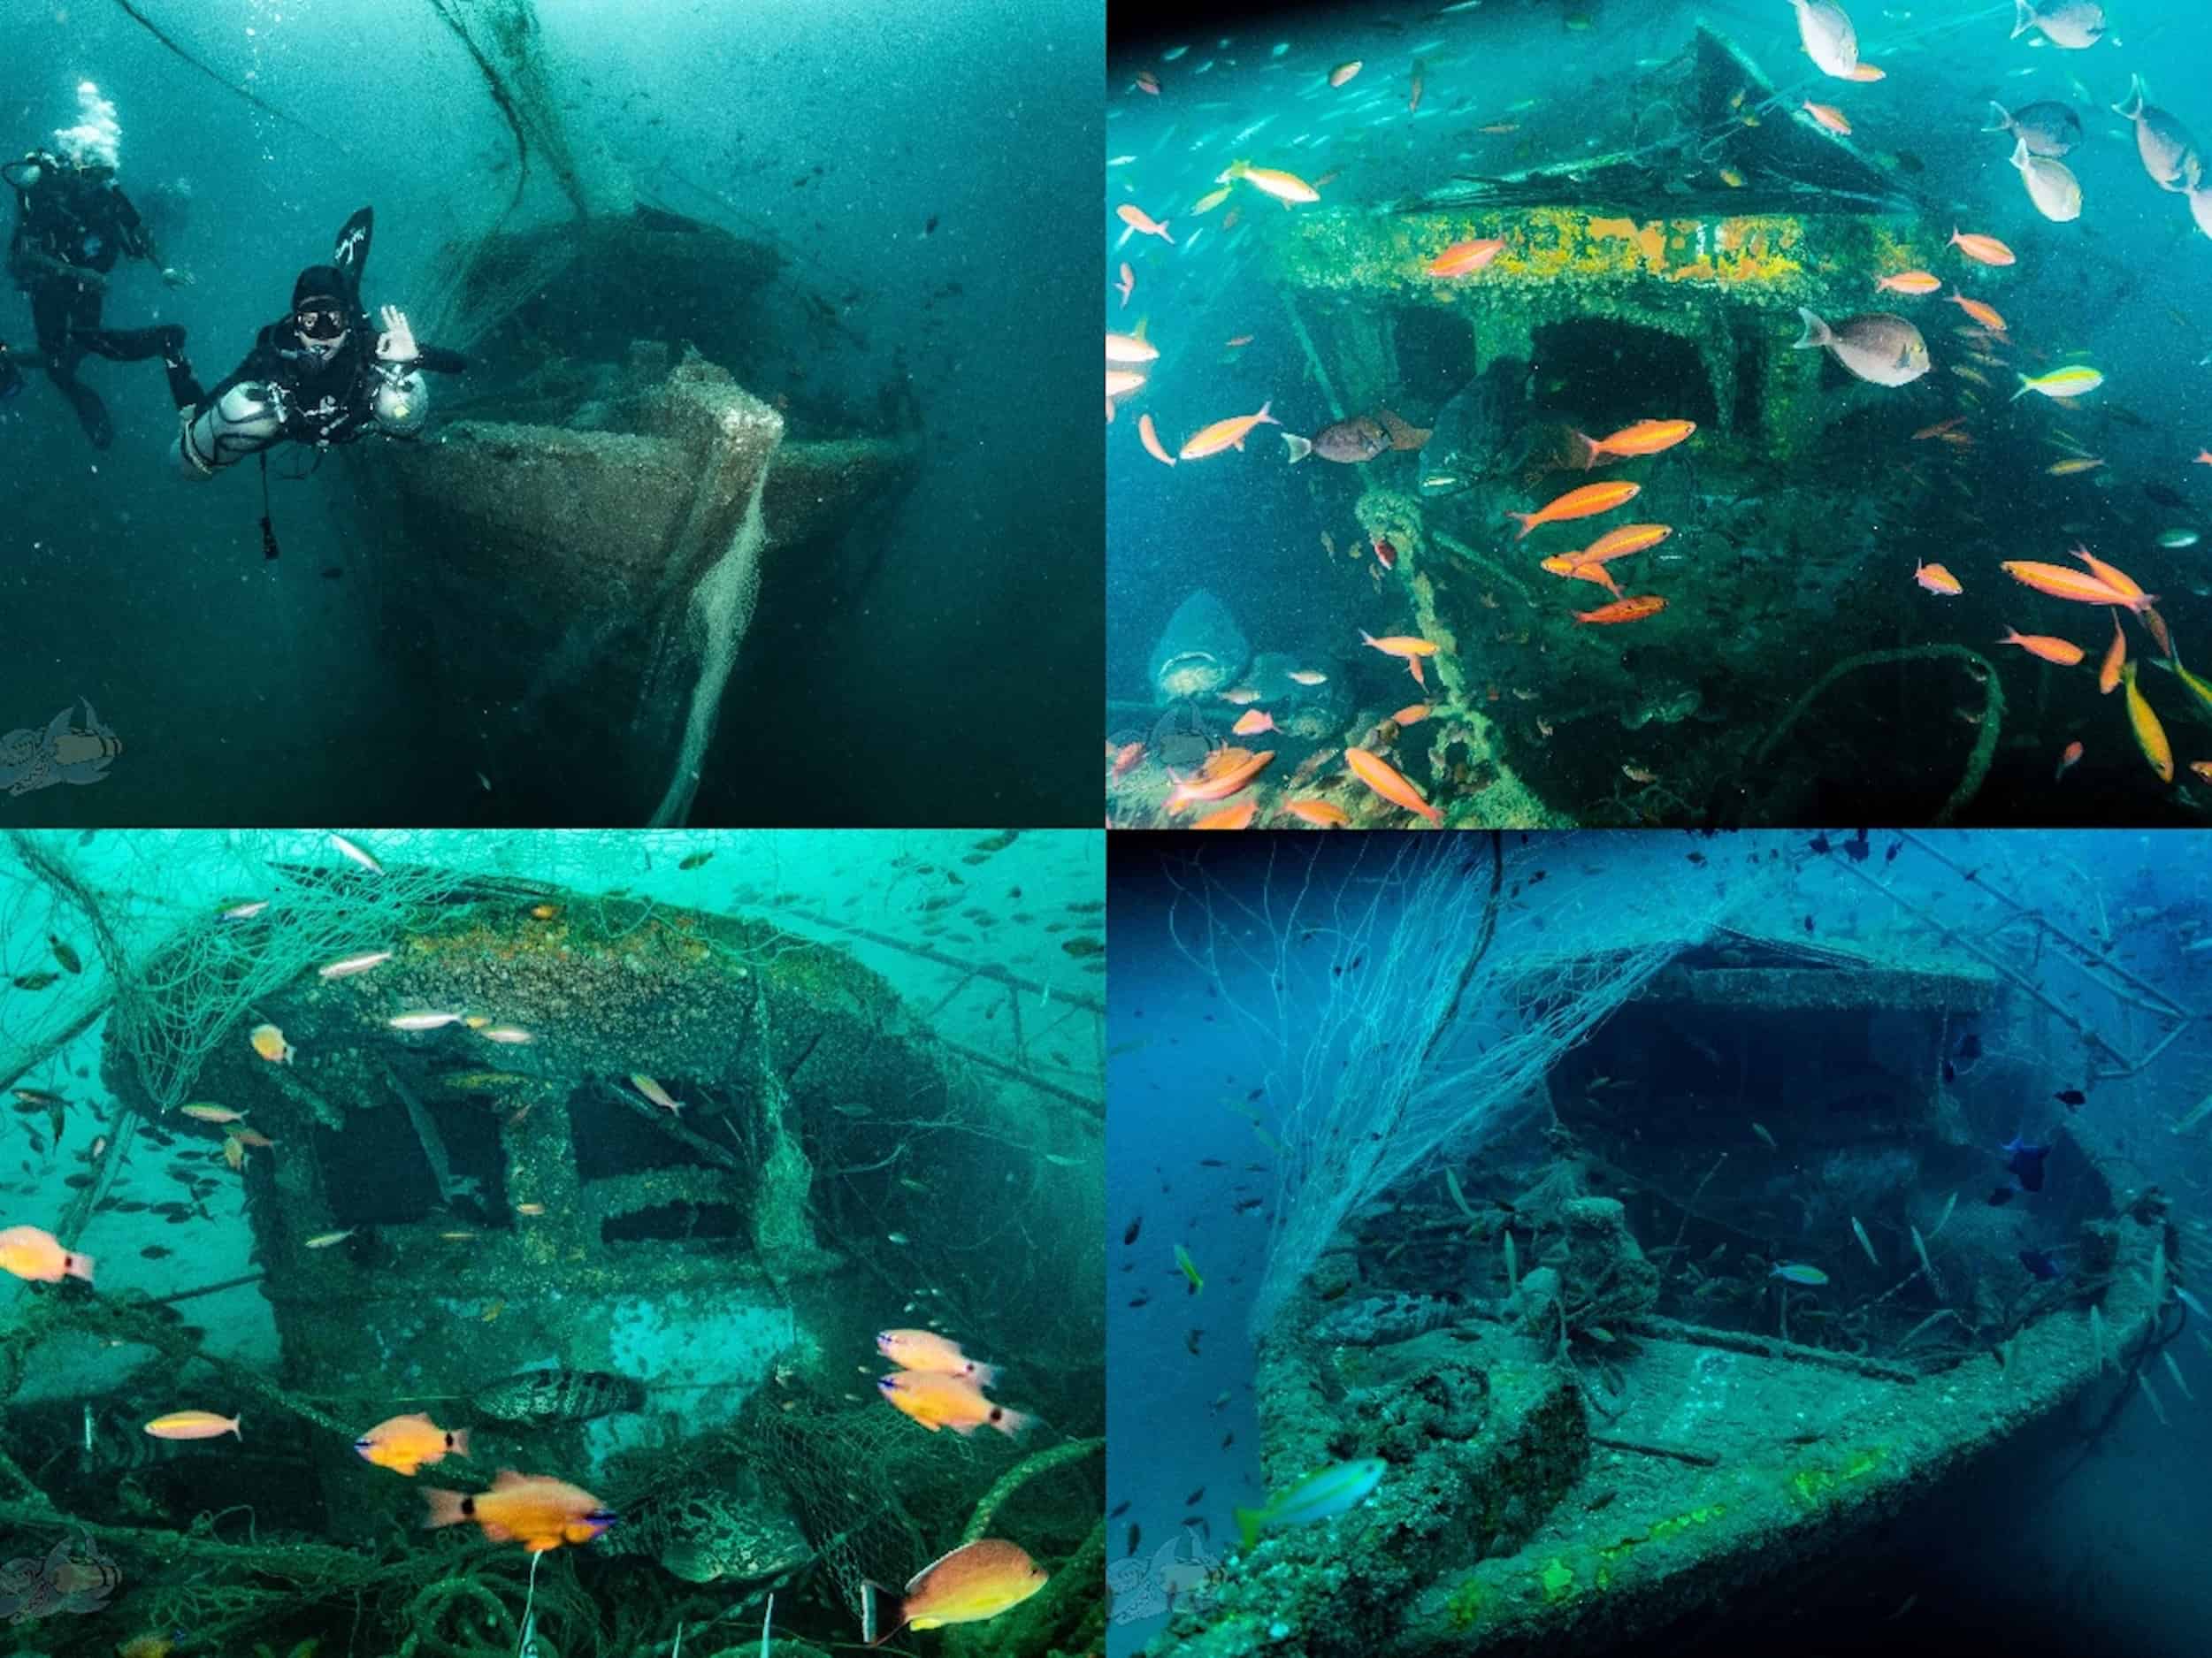 a collage of photos from the trawler wreck